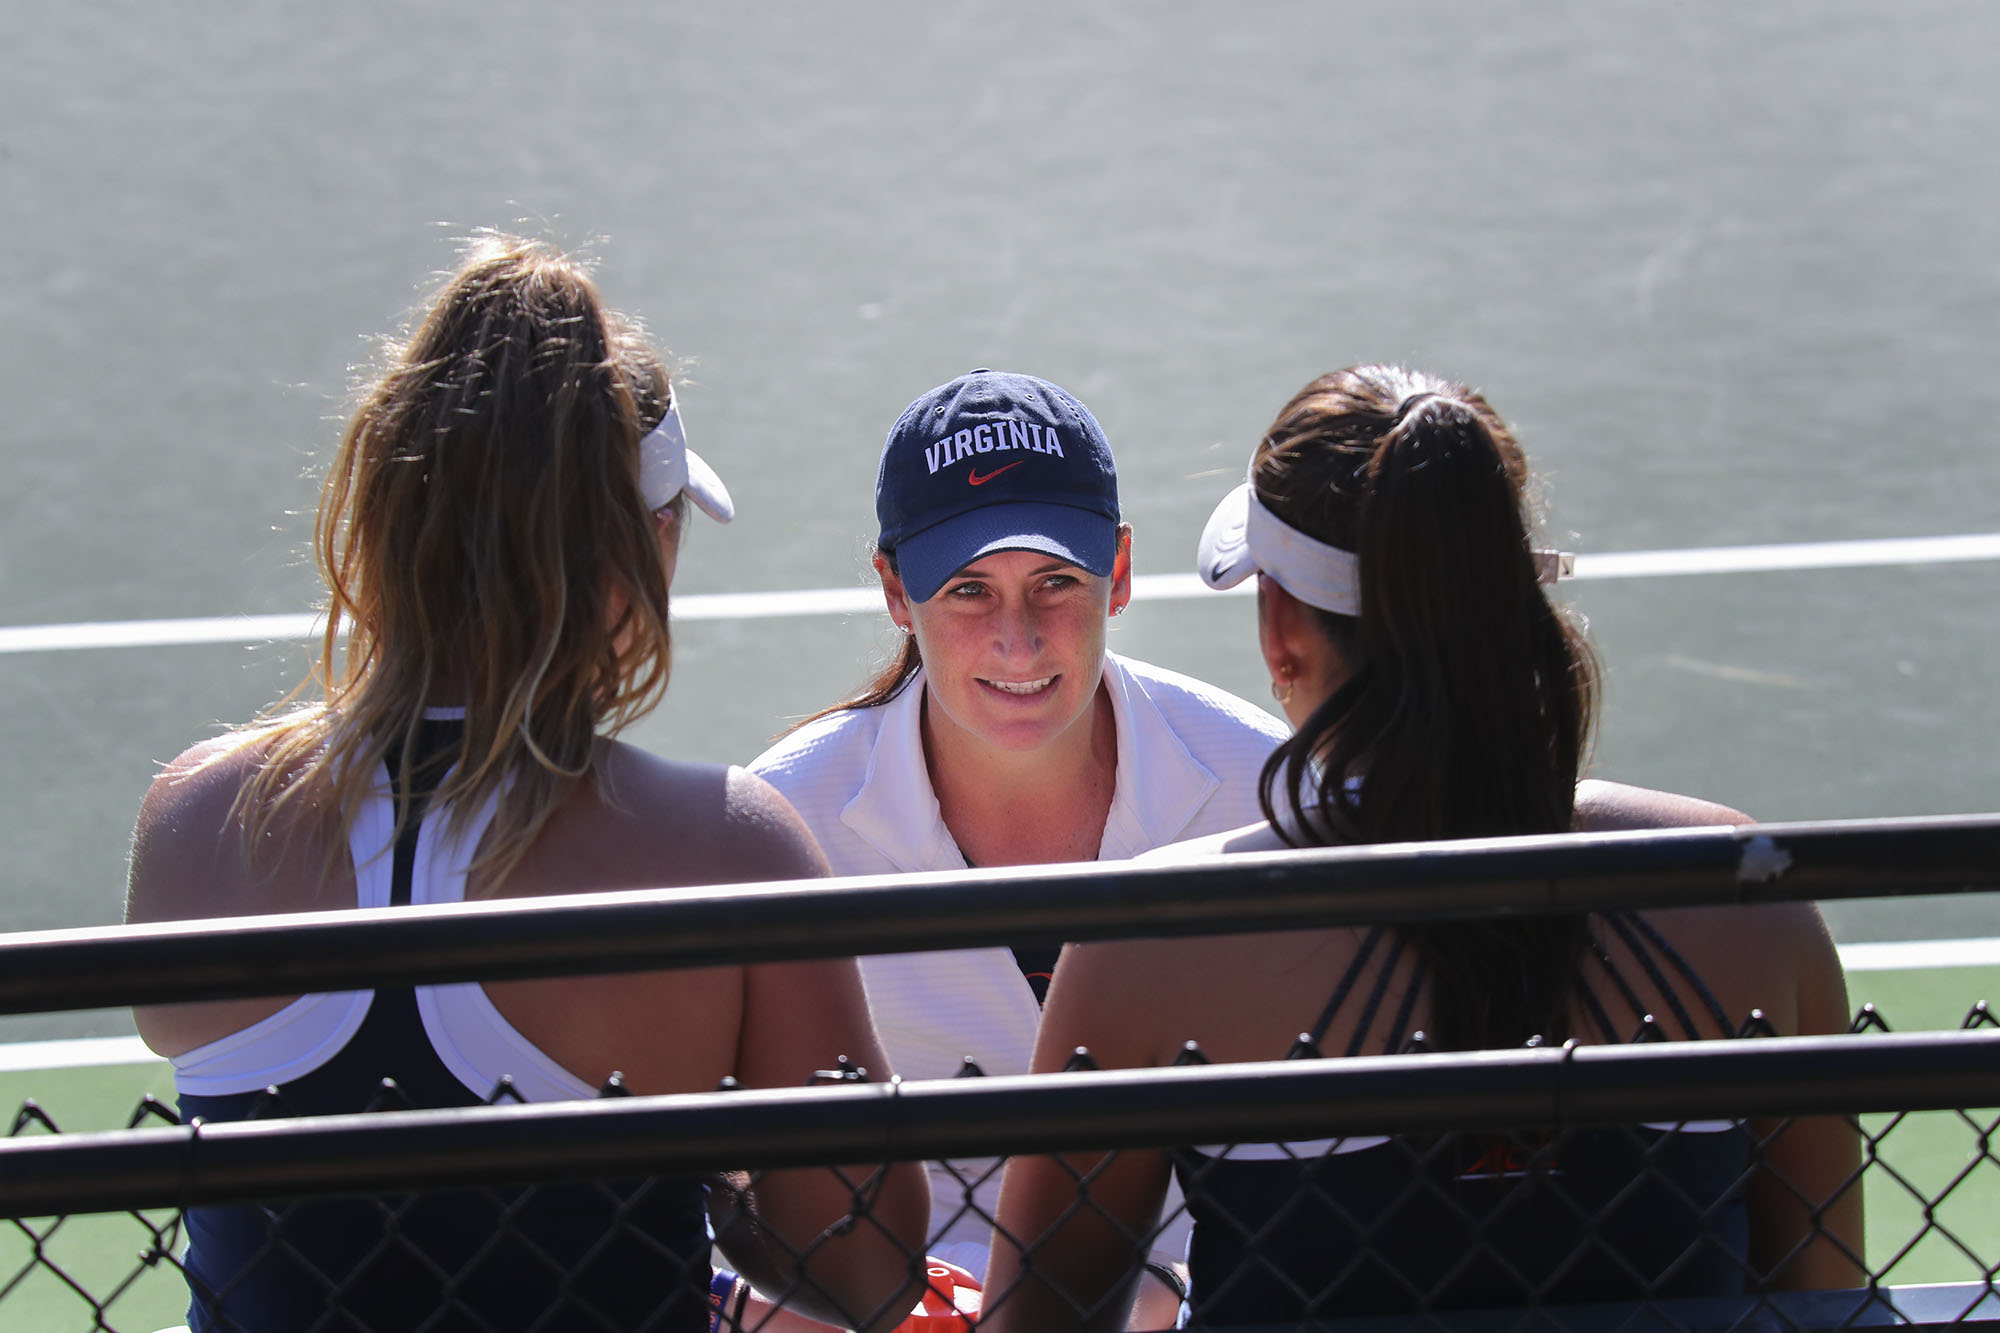 Tennis coach talking to two female tennis players who are sitting on a bench